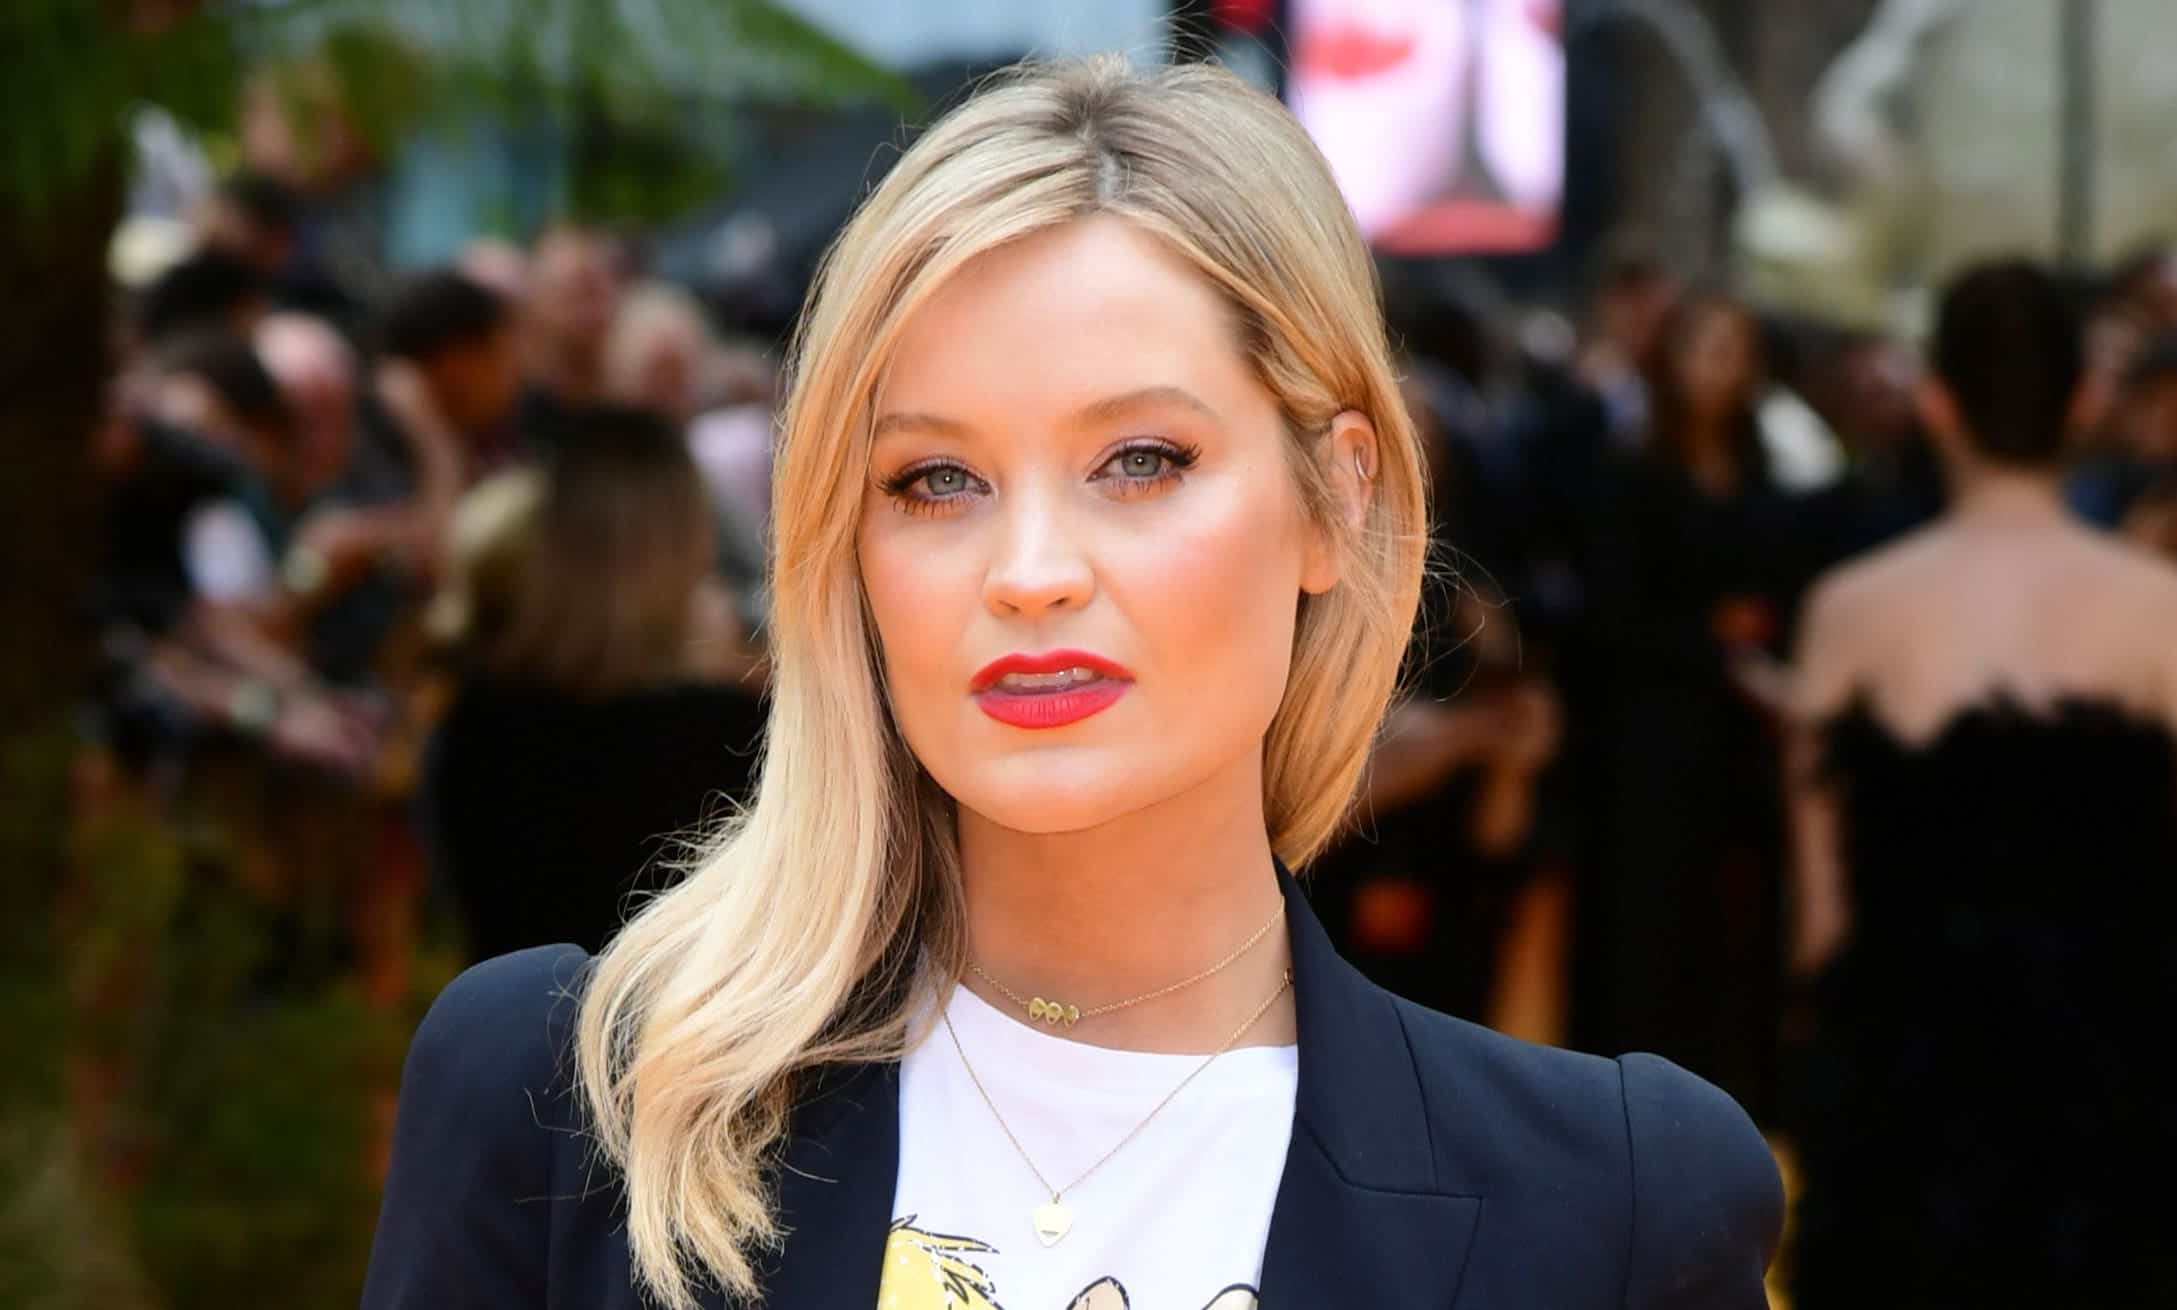 Laura Whitmore has reveals how hubby helps her out with tricky part of beauty regime